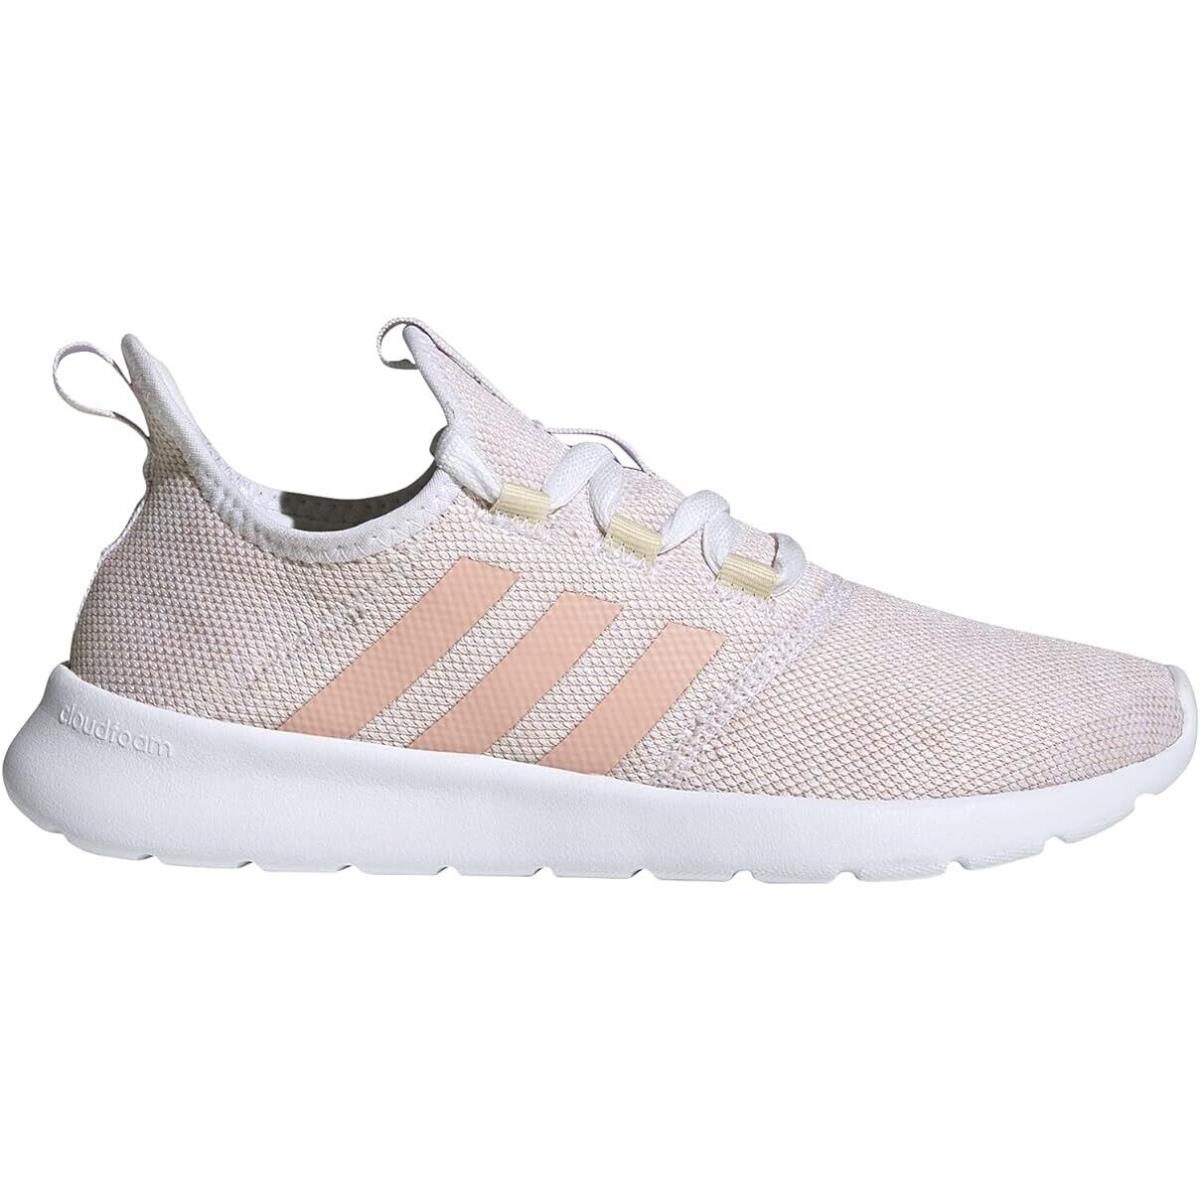 Adidas Womens Cloudfoam Pure 2.0 Running Shoes Wonder White Vapour Pink Size 10 - Pink